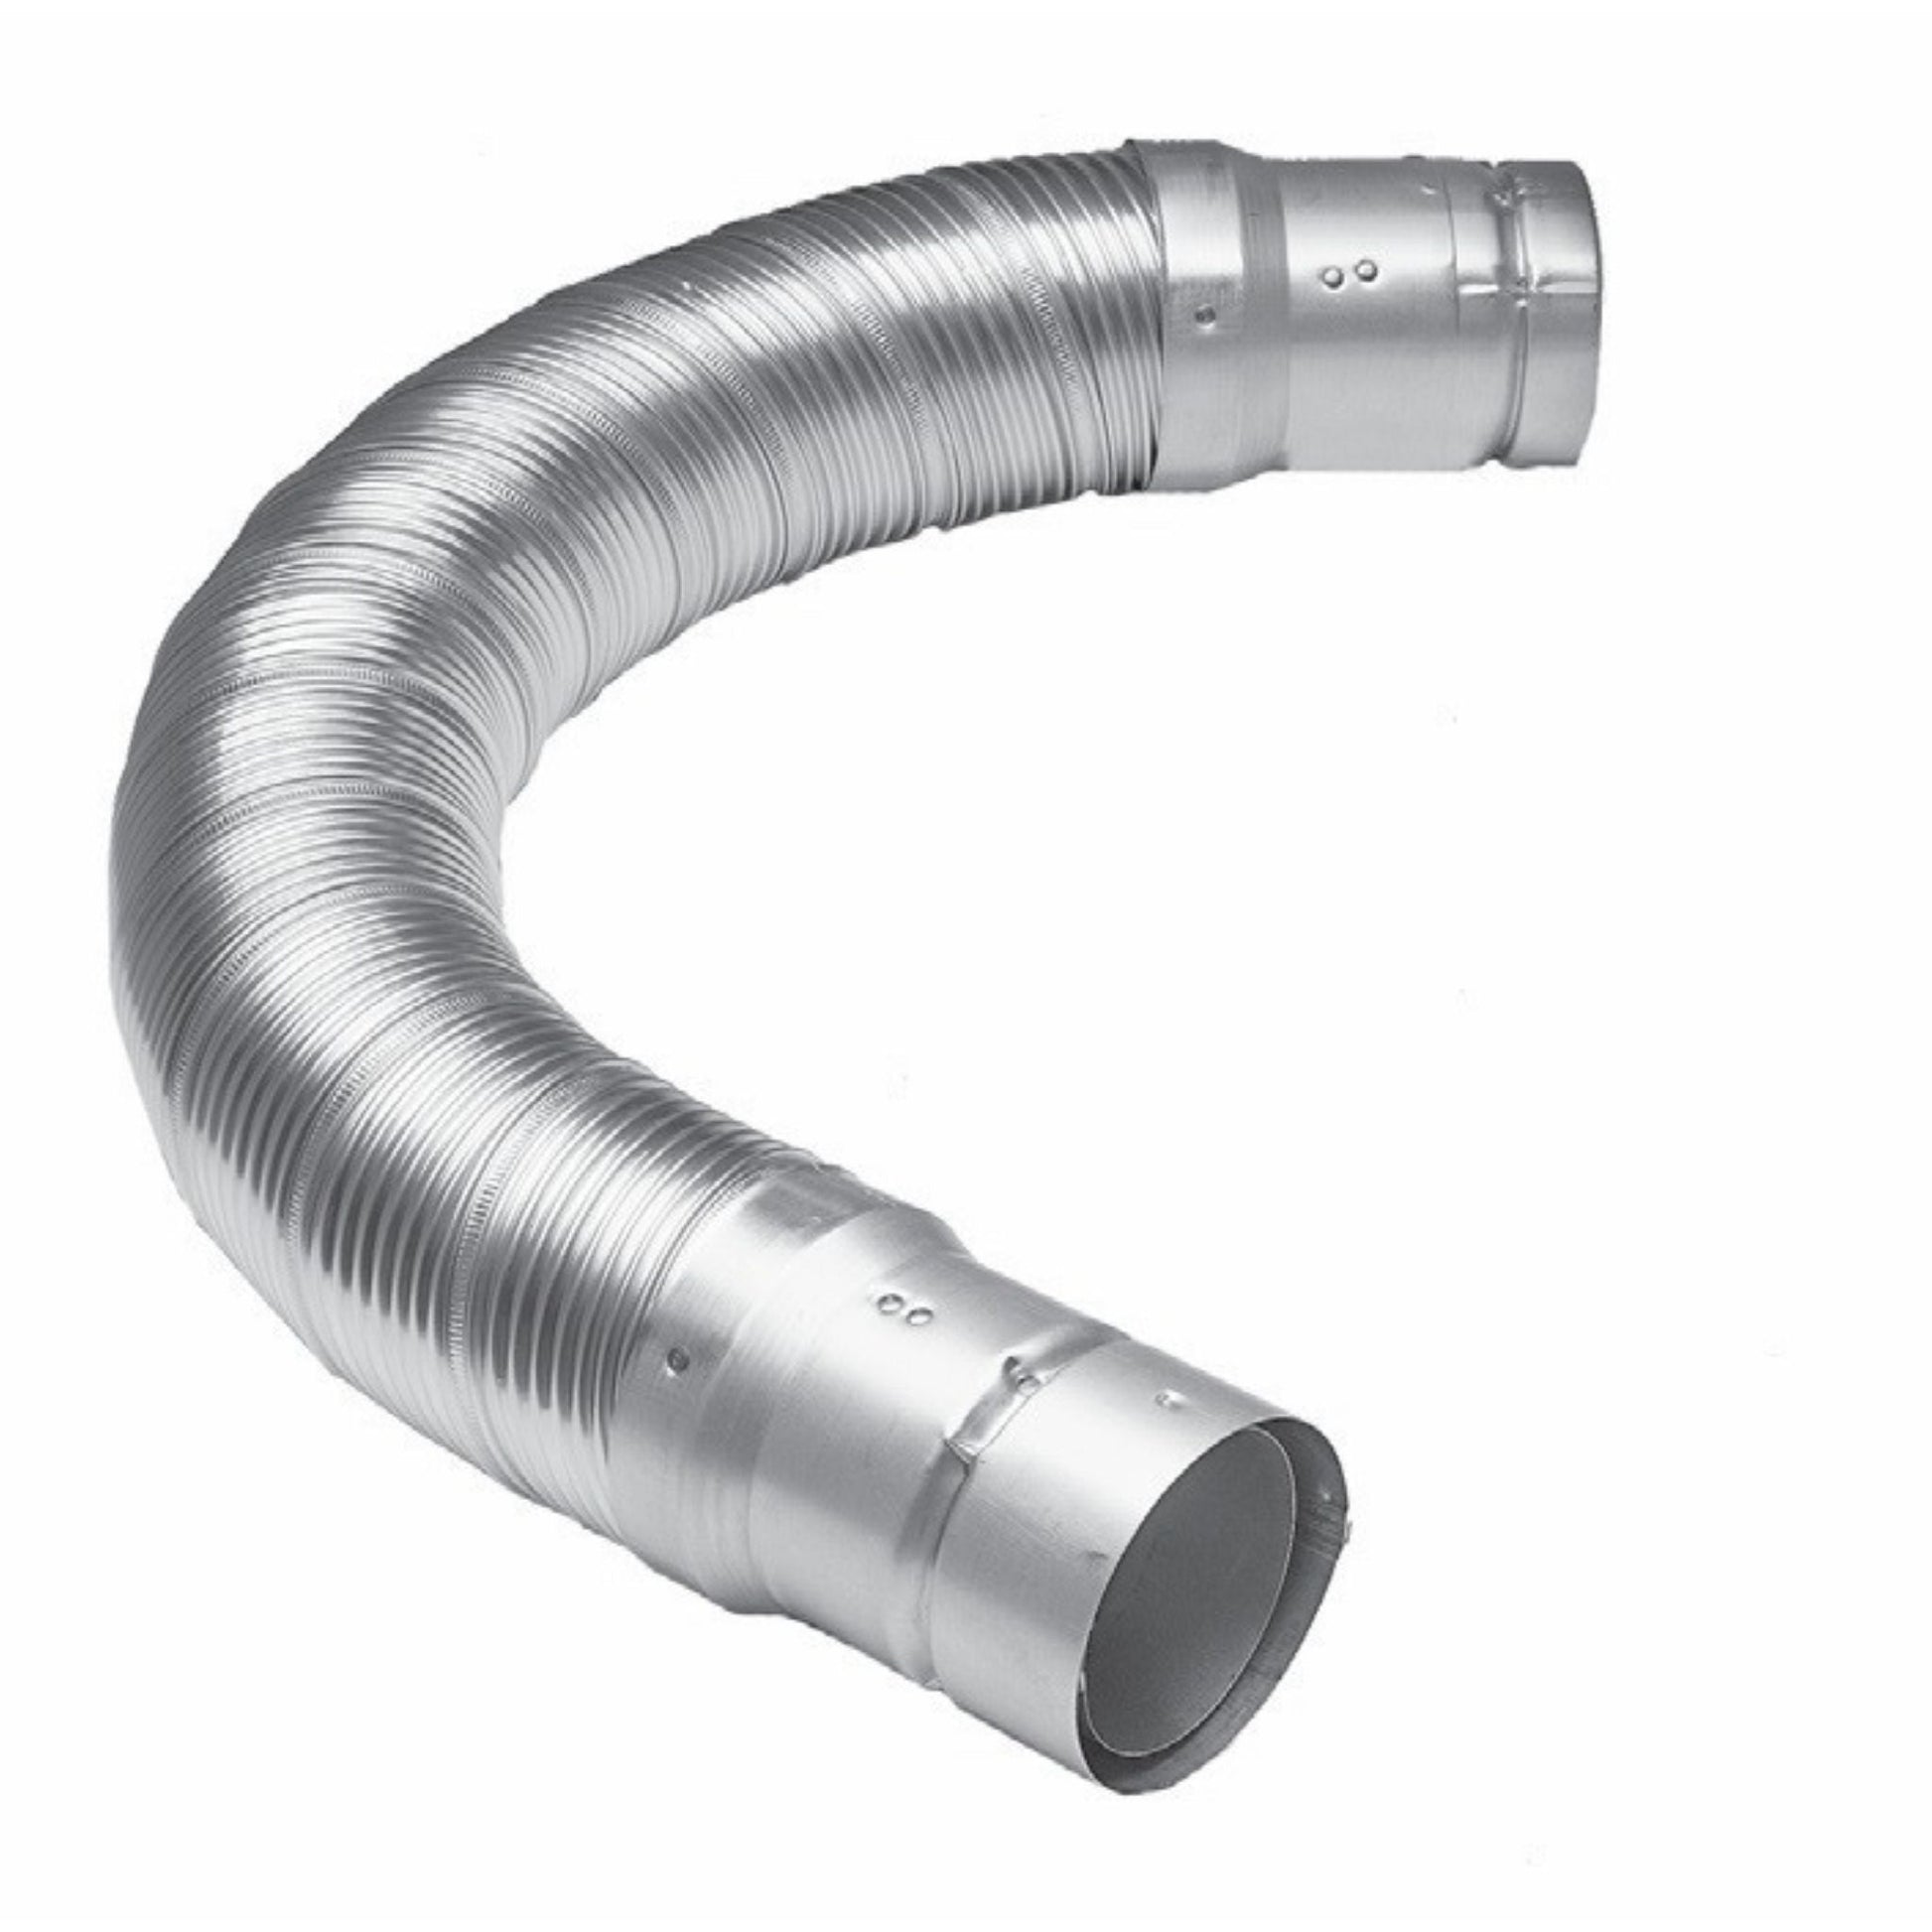 DuraVent DuraConnect II B-Vent 5" x 48" Flexible Double-Wall Gas Vent Connector